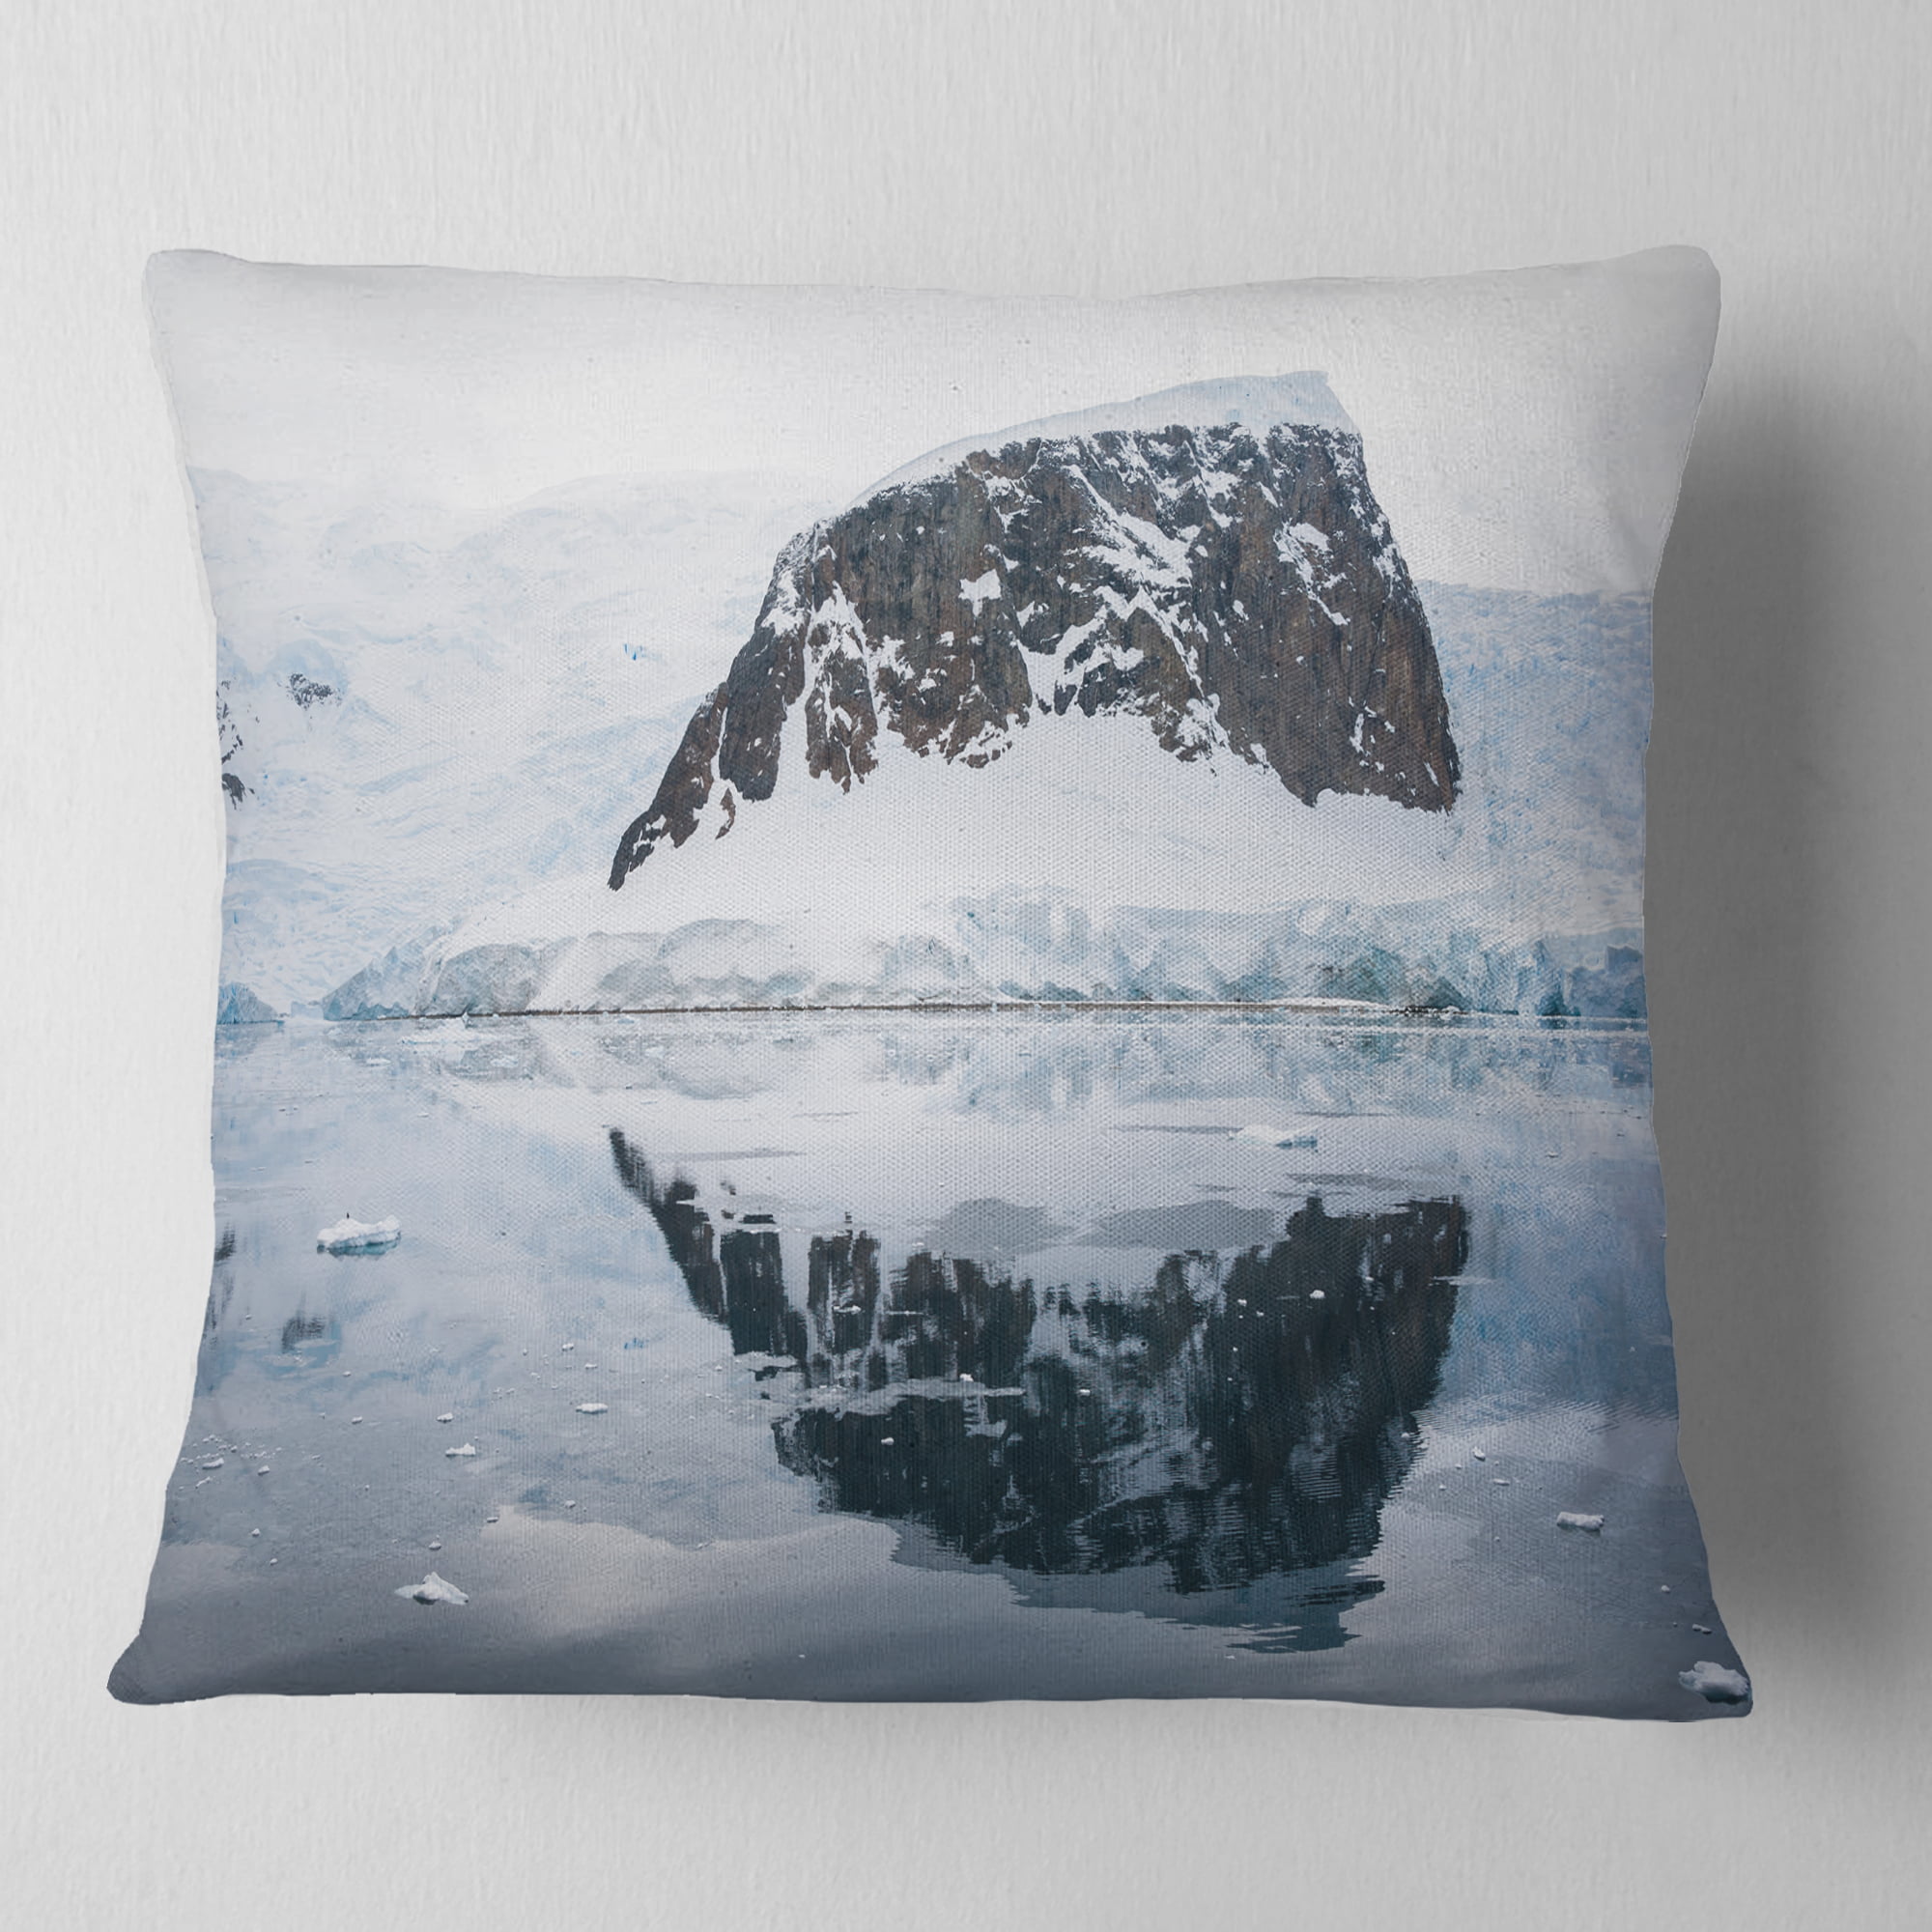 Everest Mountain Nature Acrylic Painting Designer 18" x 18" Filled Cushion Cover 